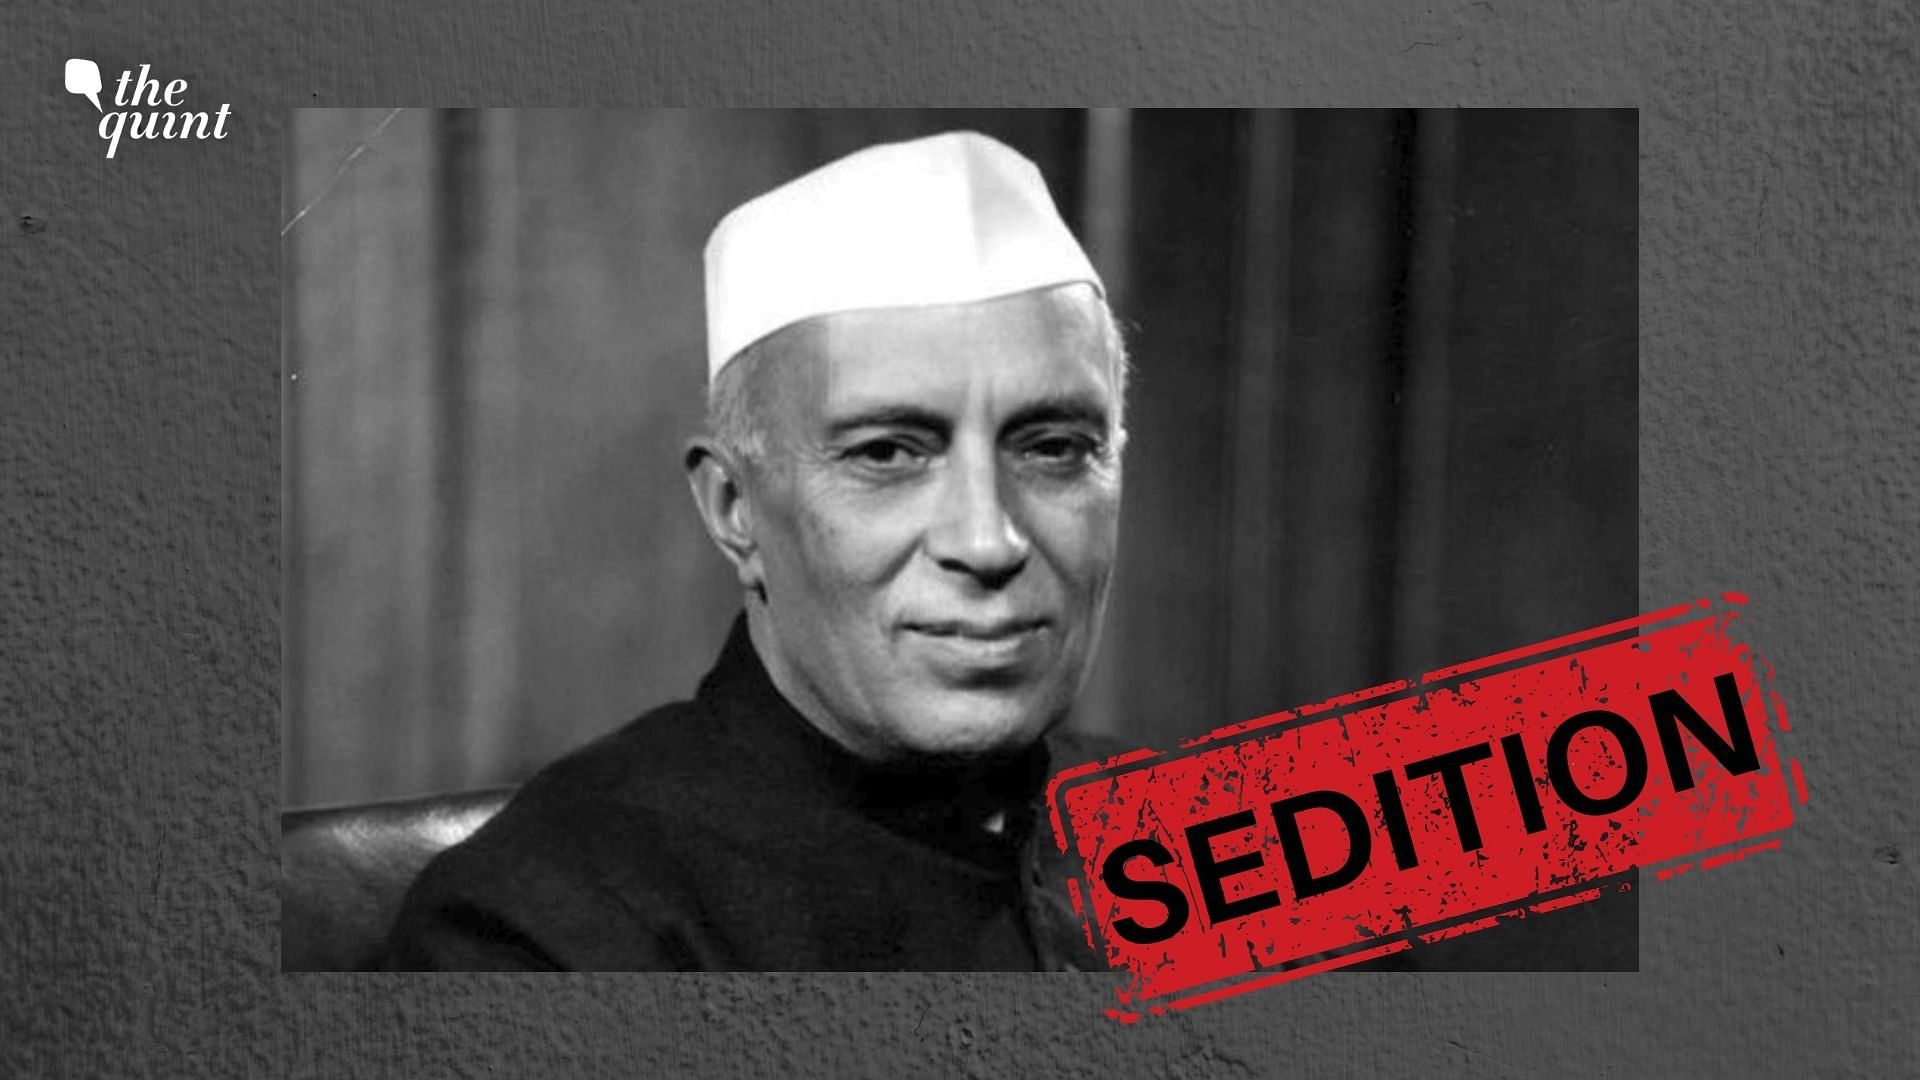 <div class="paragraphs"><p>“We are in post-Constitution era. Pandit Jawaharlal Nehru had said that this provision is obnoxious and the sooner we get rid of sedition, the better," Kapil Sibal had claimed.</p></div>